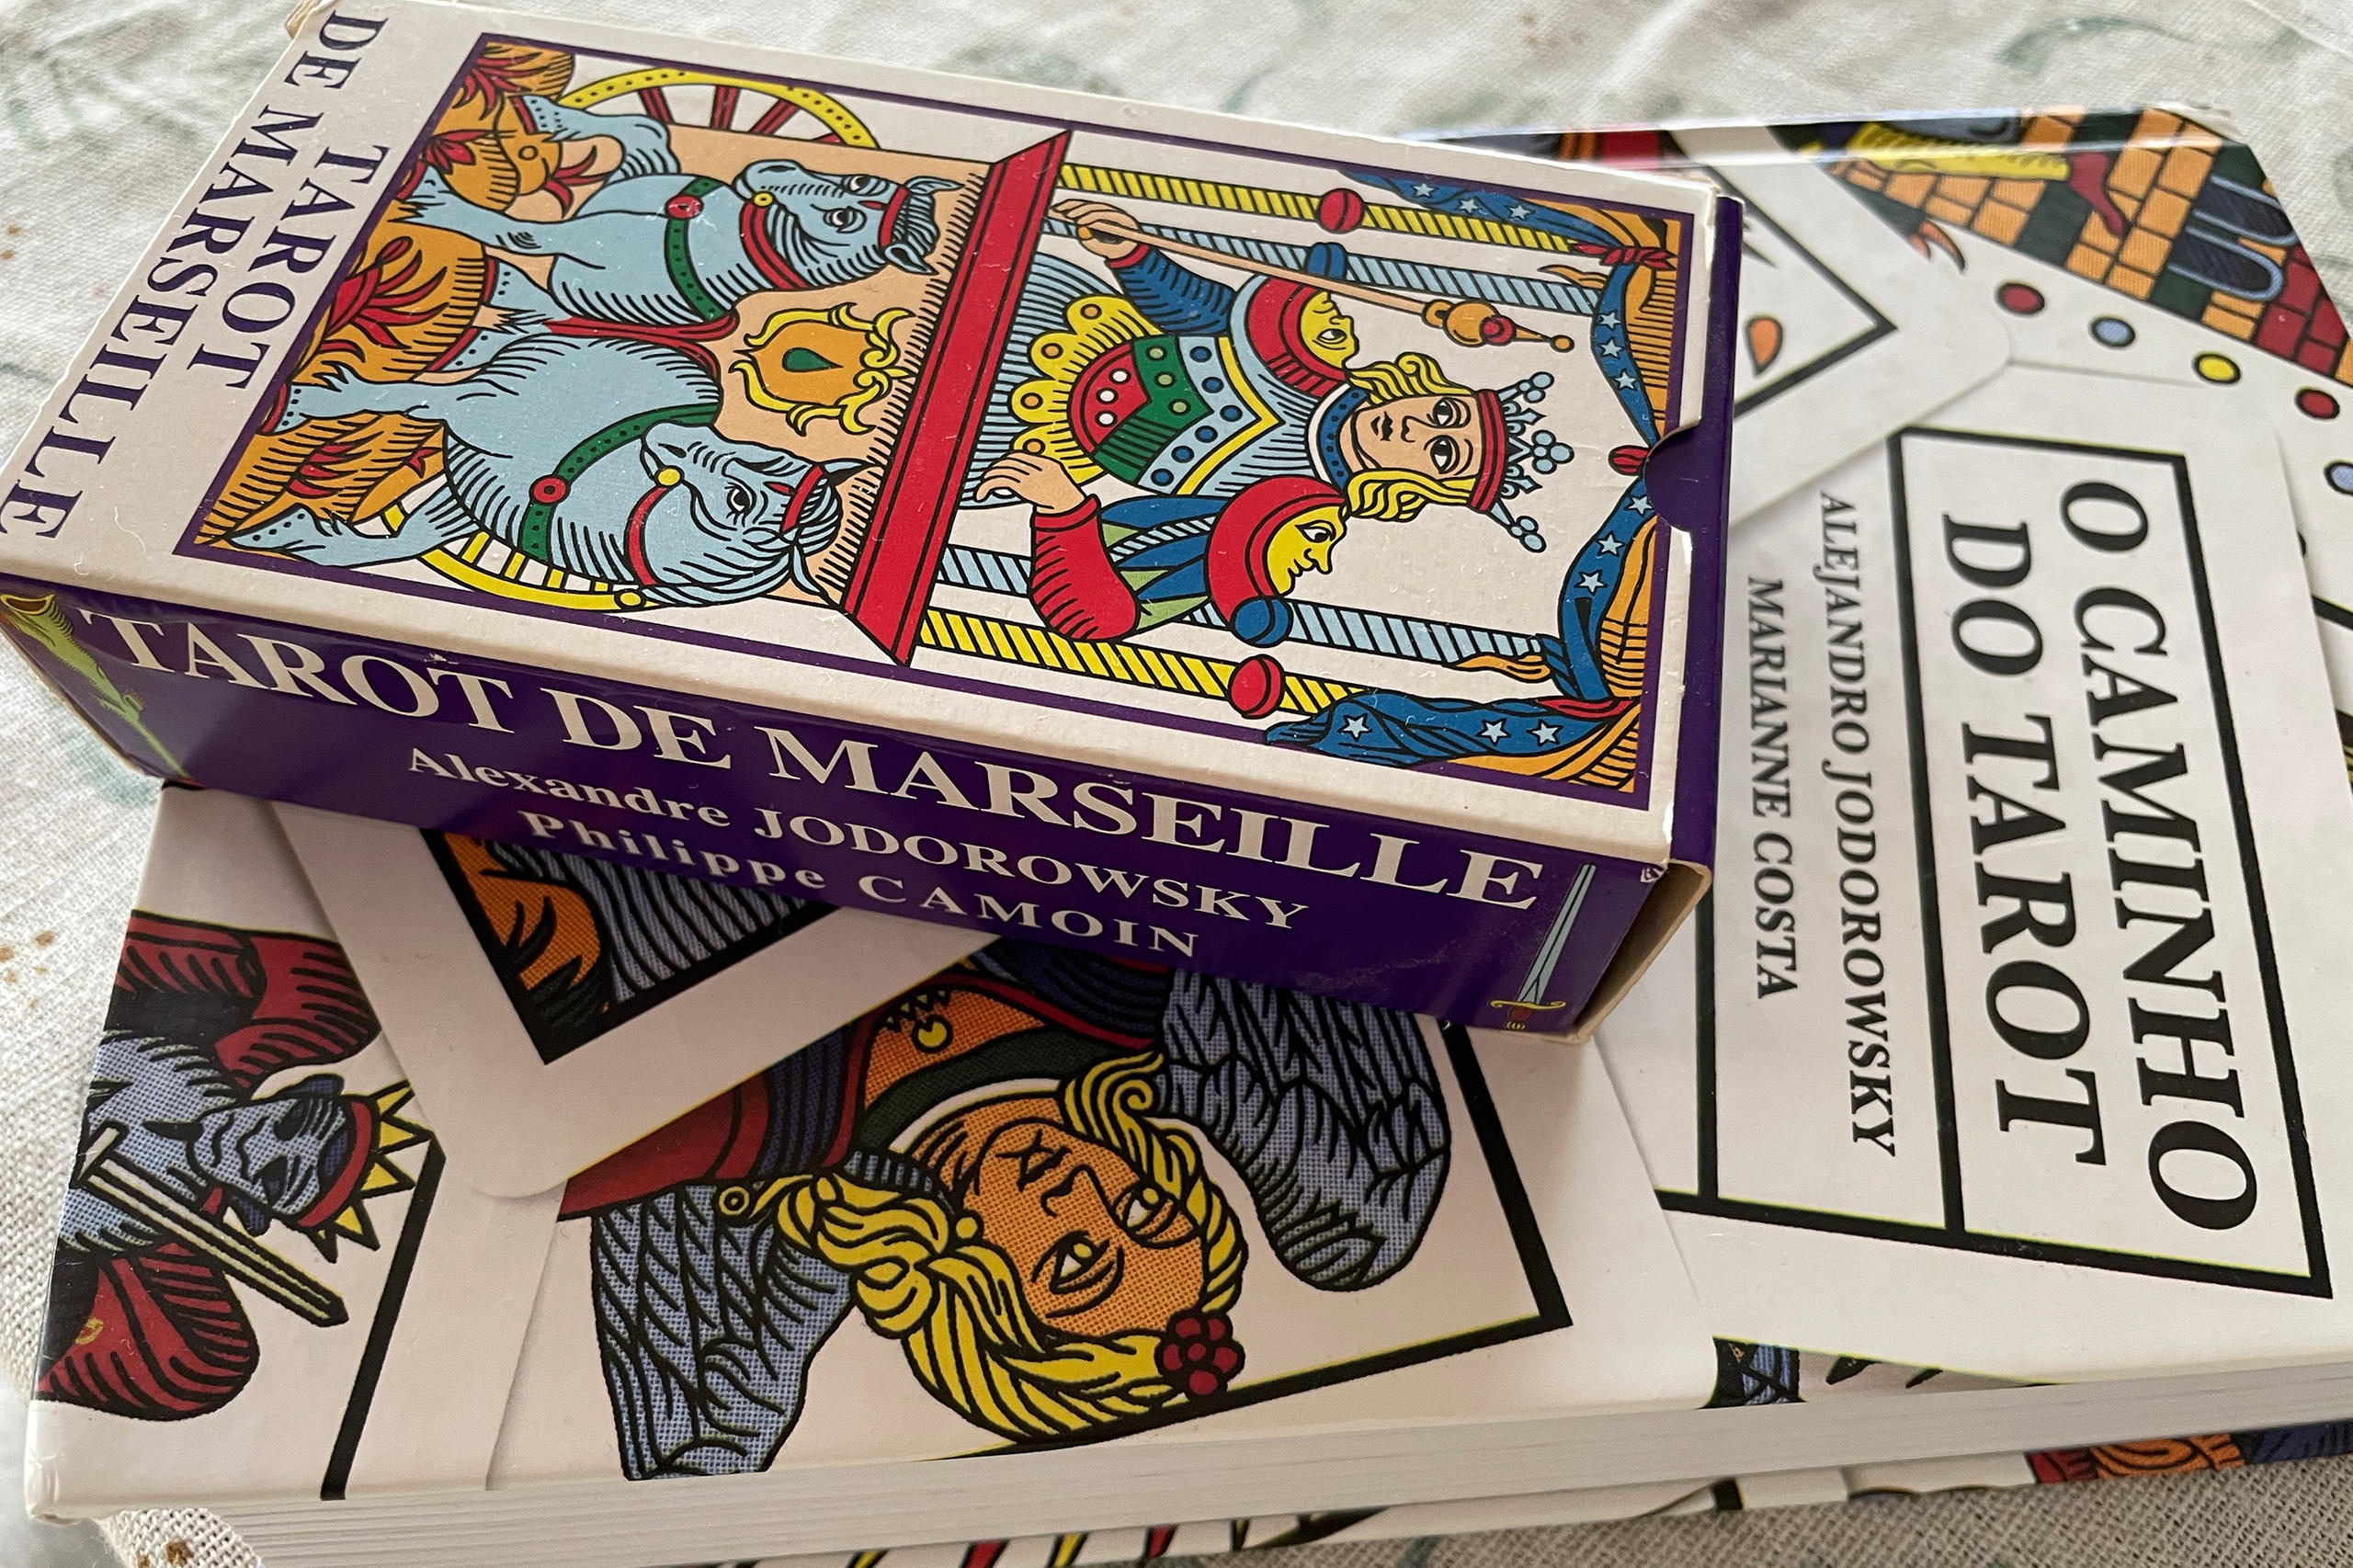 The Tarot de Marseille and Jodorowsky introductory book